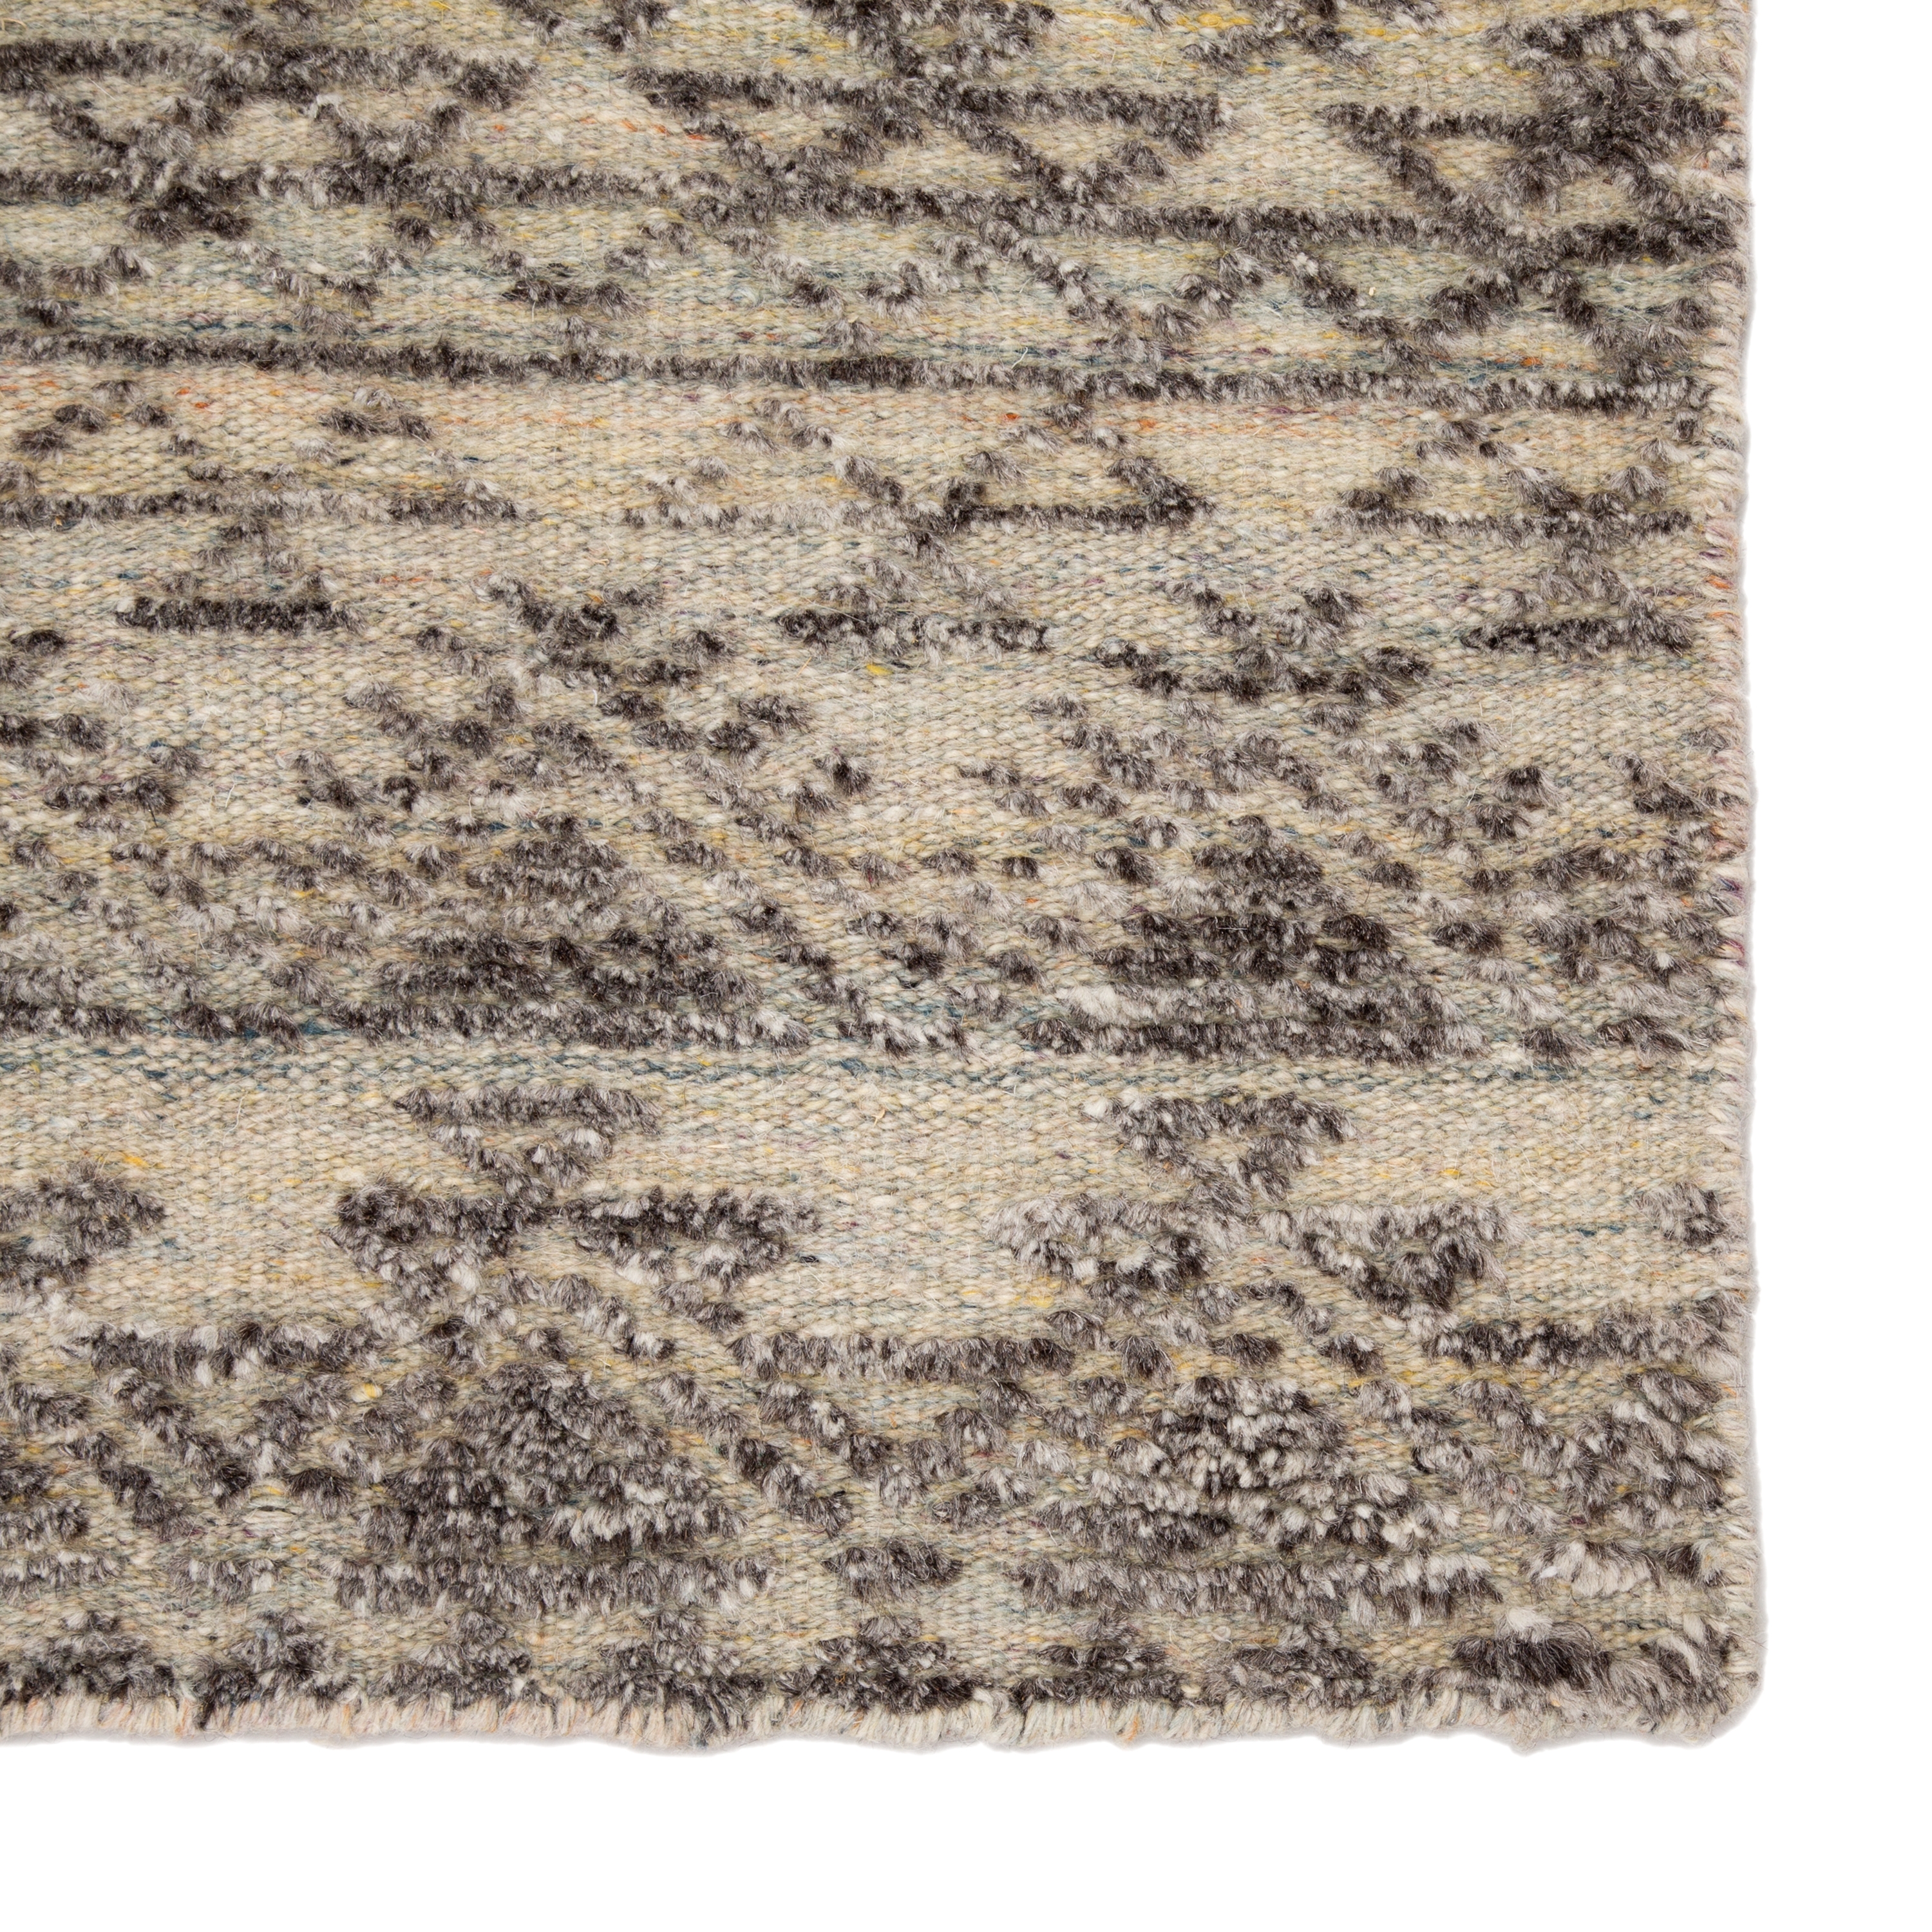 Prentice Hand-Knotted Geometric Dark Gray/ Taupe Area Rug (9'X13') - Image 3